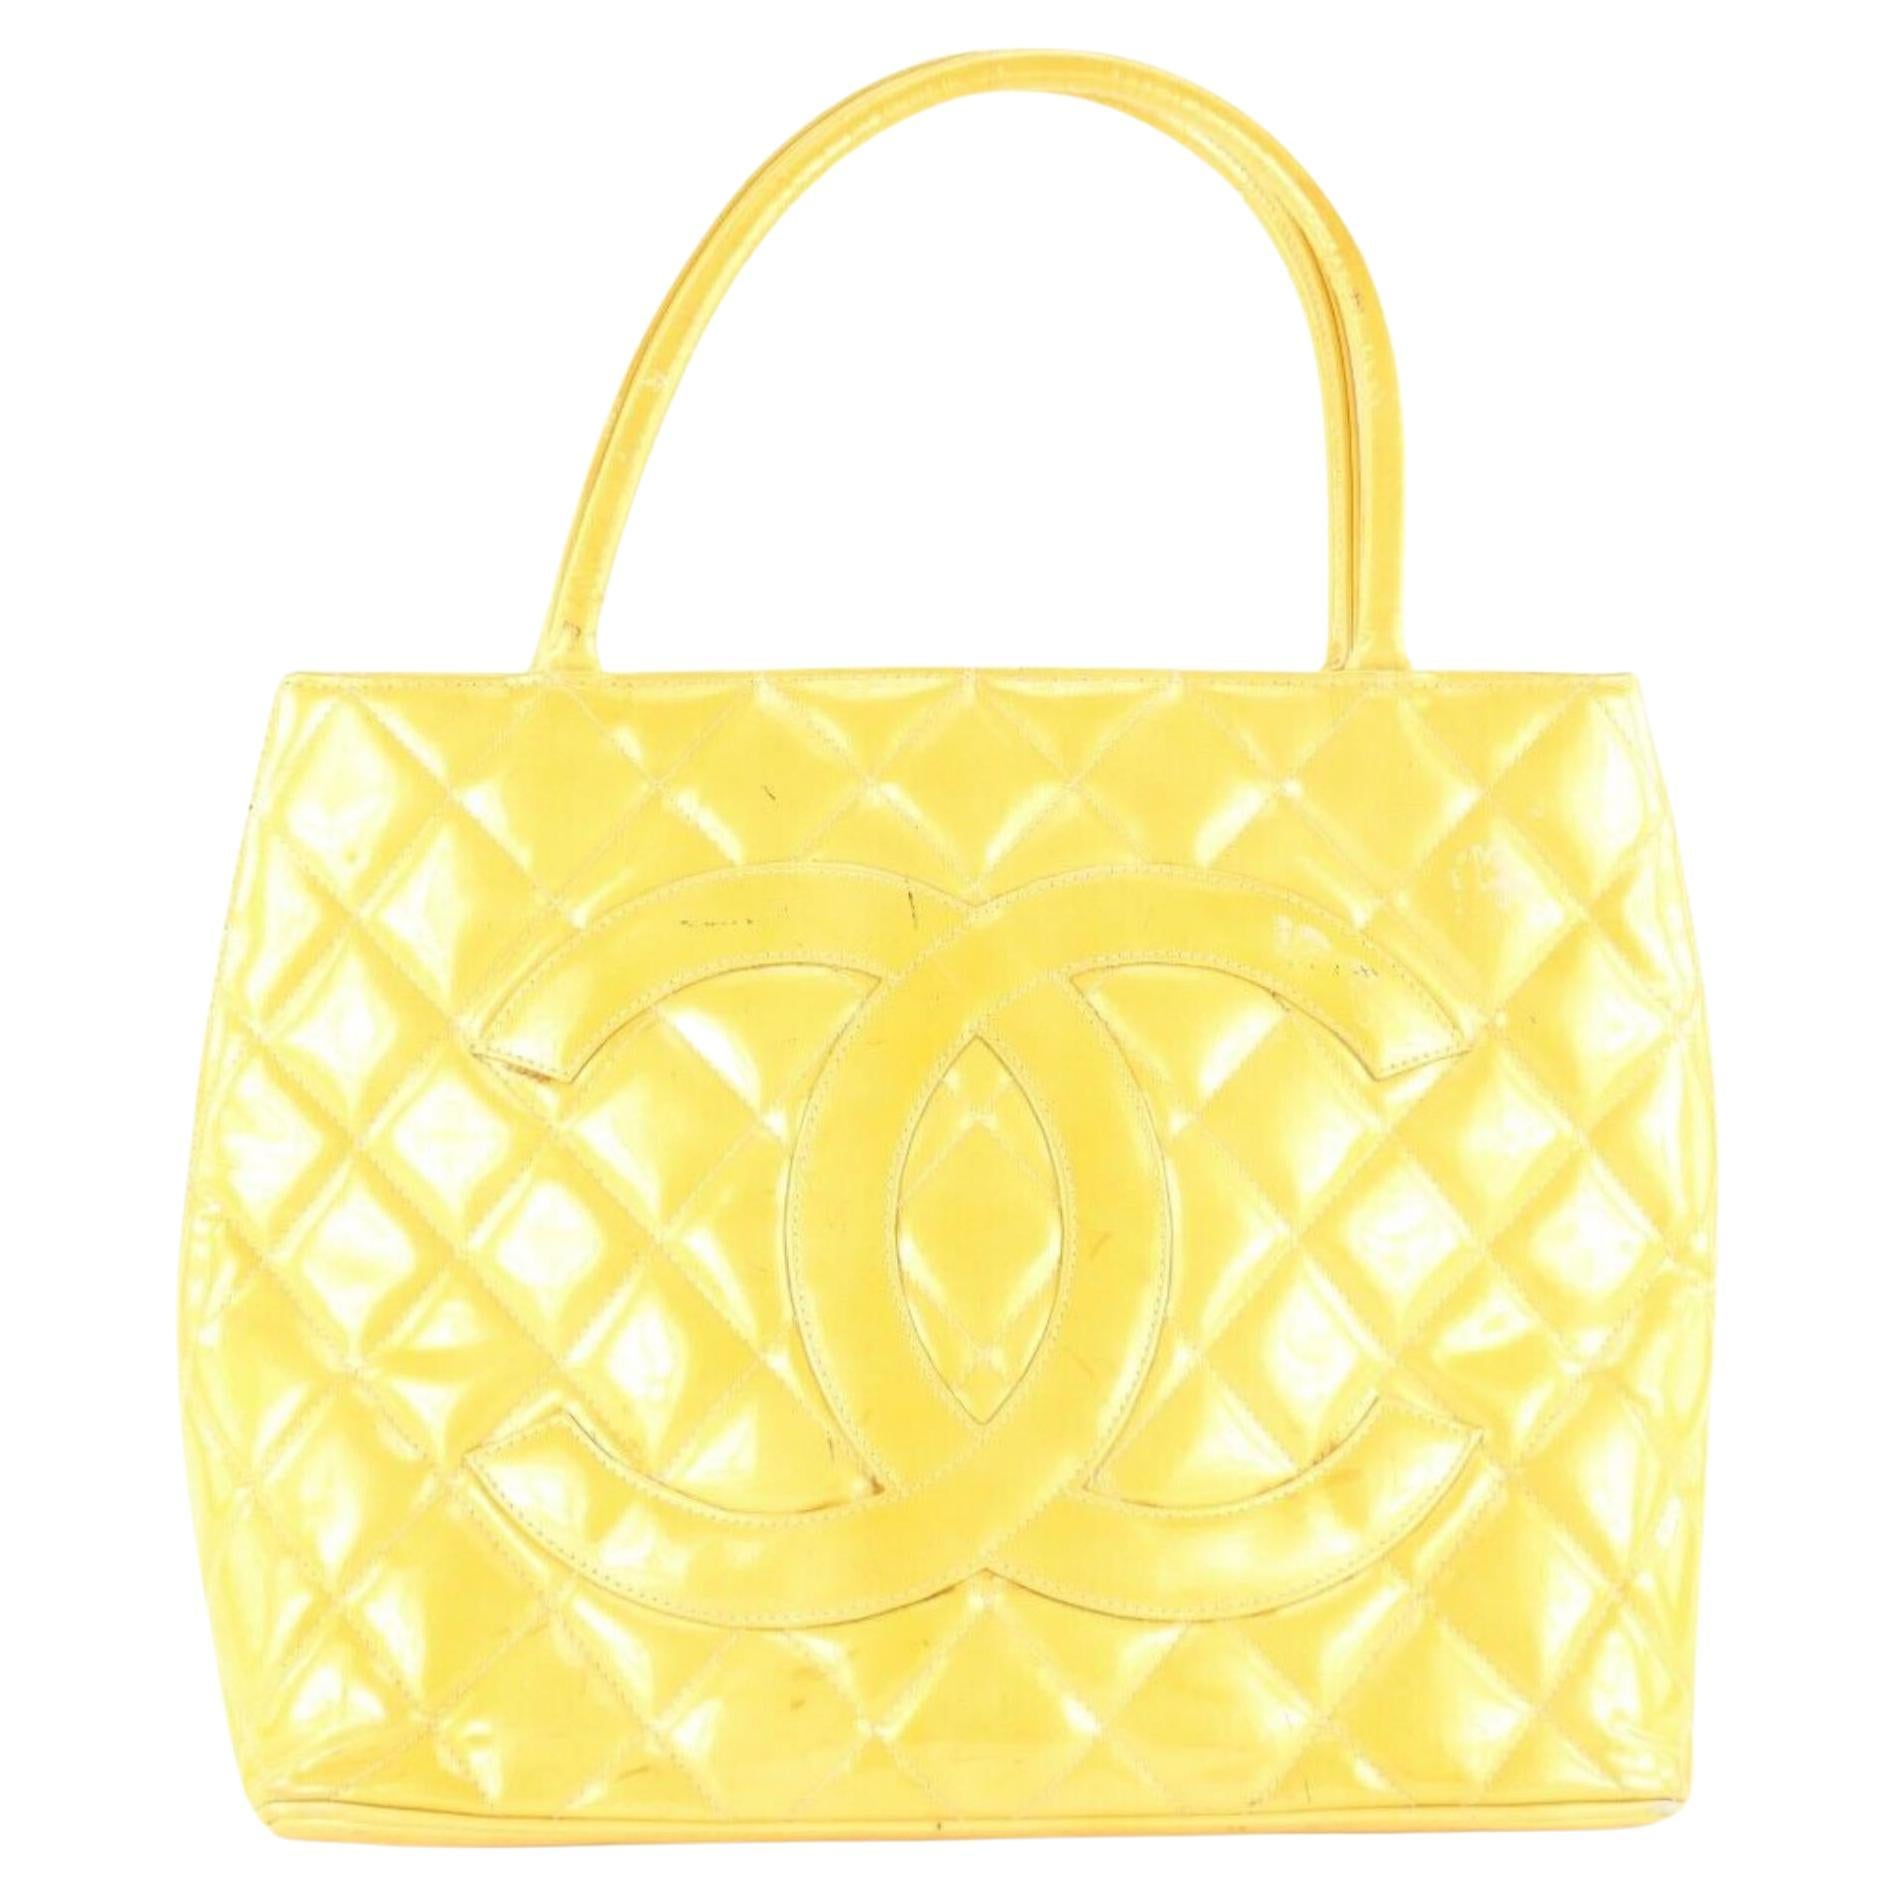 Chanel Yellow Quilted Patent Zip Tote Bag 1CK1108